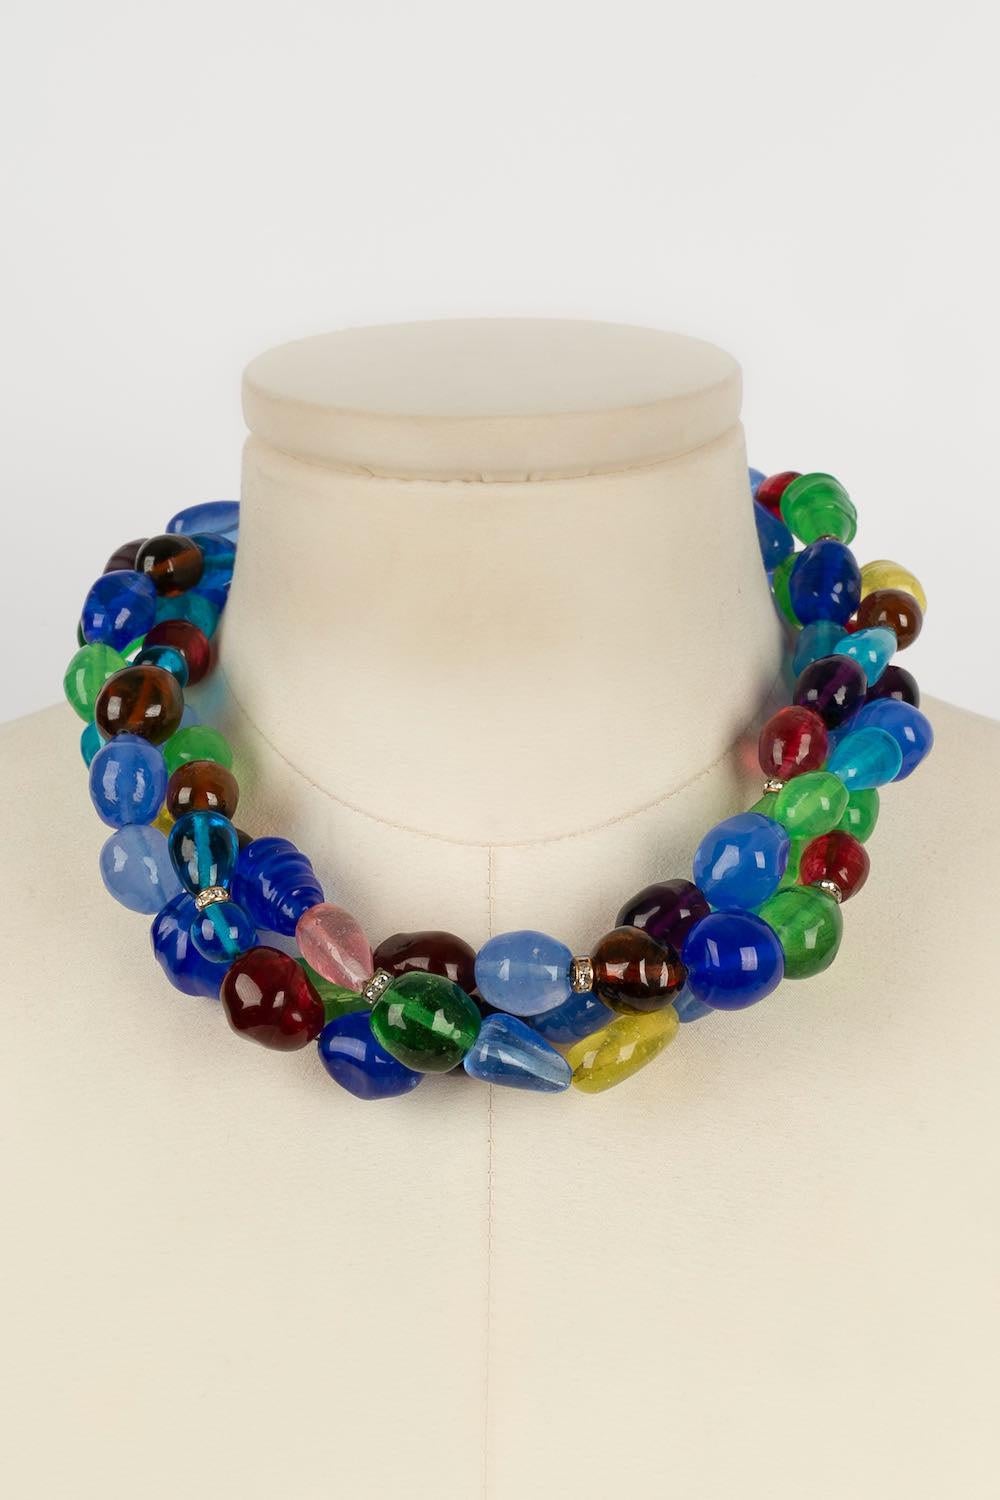 Chanel -Short necklace in multicolored glass paste and rhinestones. Model dating from the 1950s.

Additional information: 
Dimensions: Length: 45 cm
Condition: Very good condition
Seller Ref number: CB93